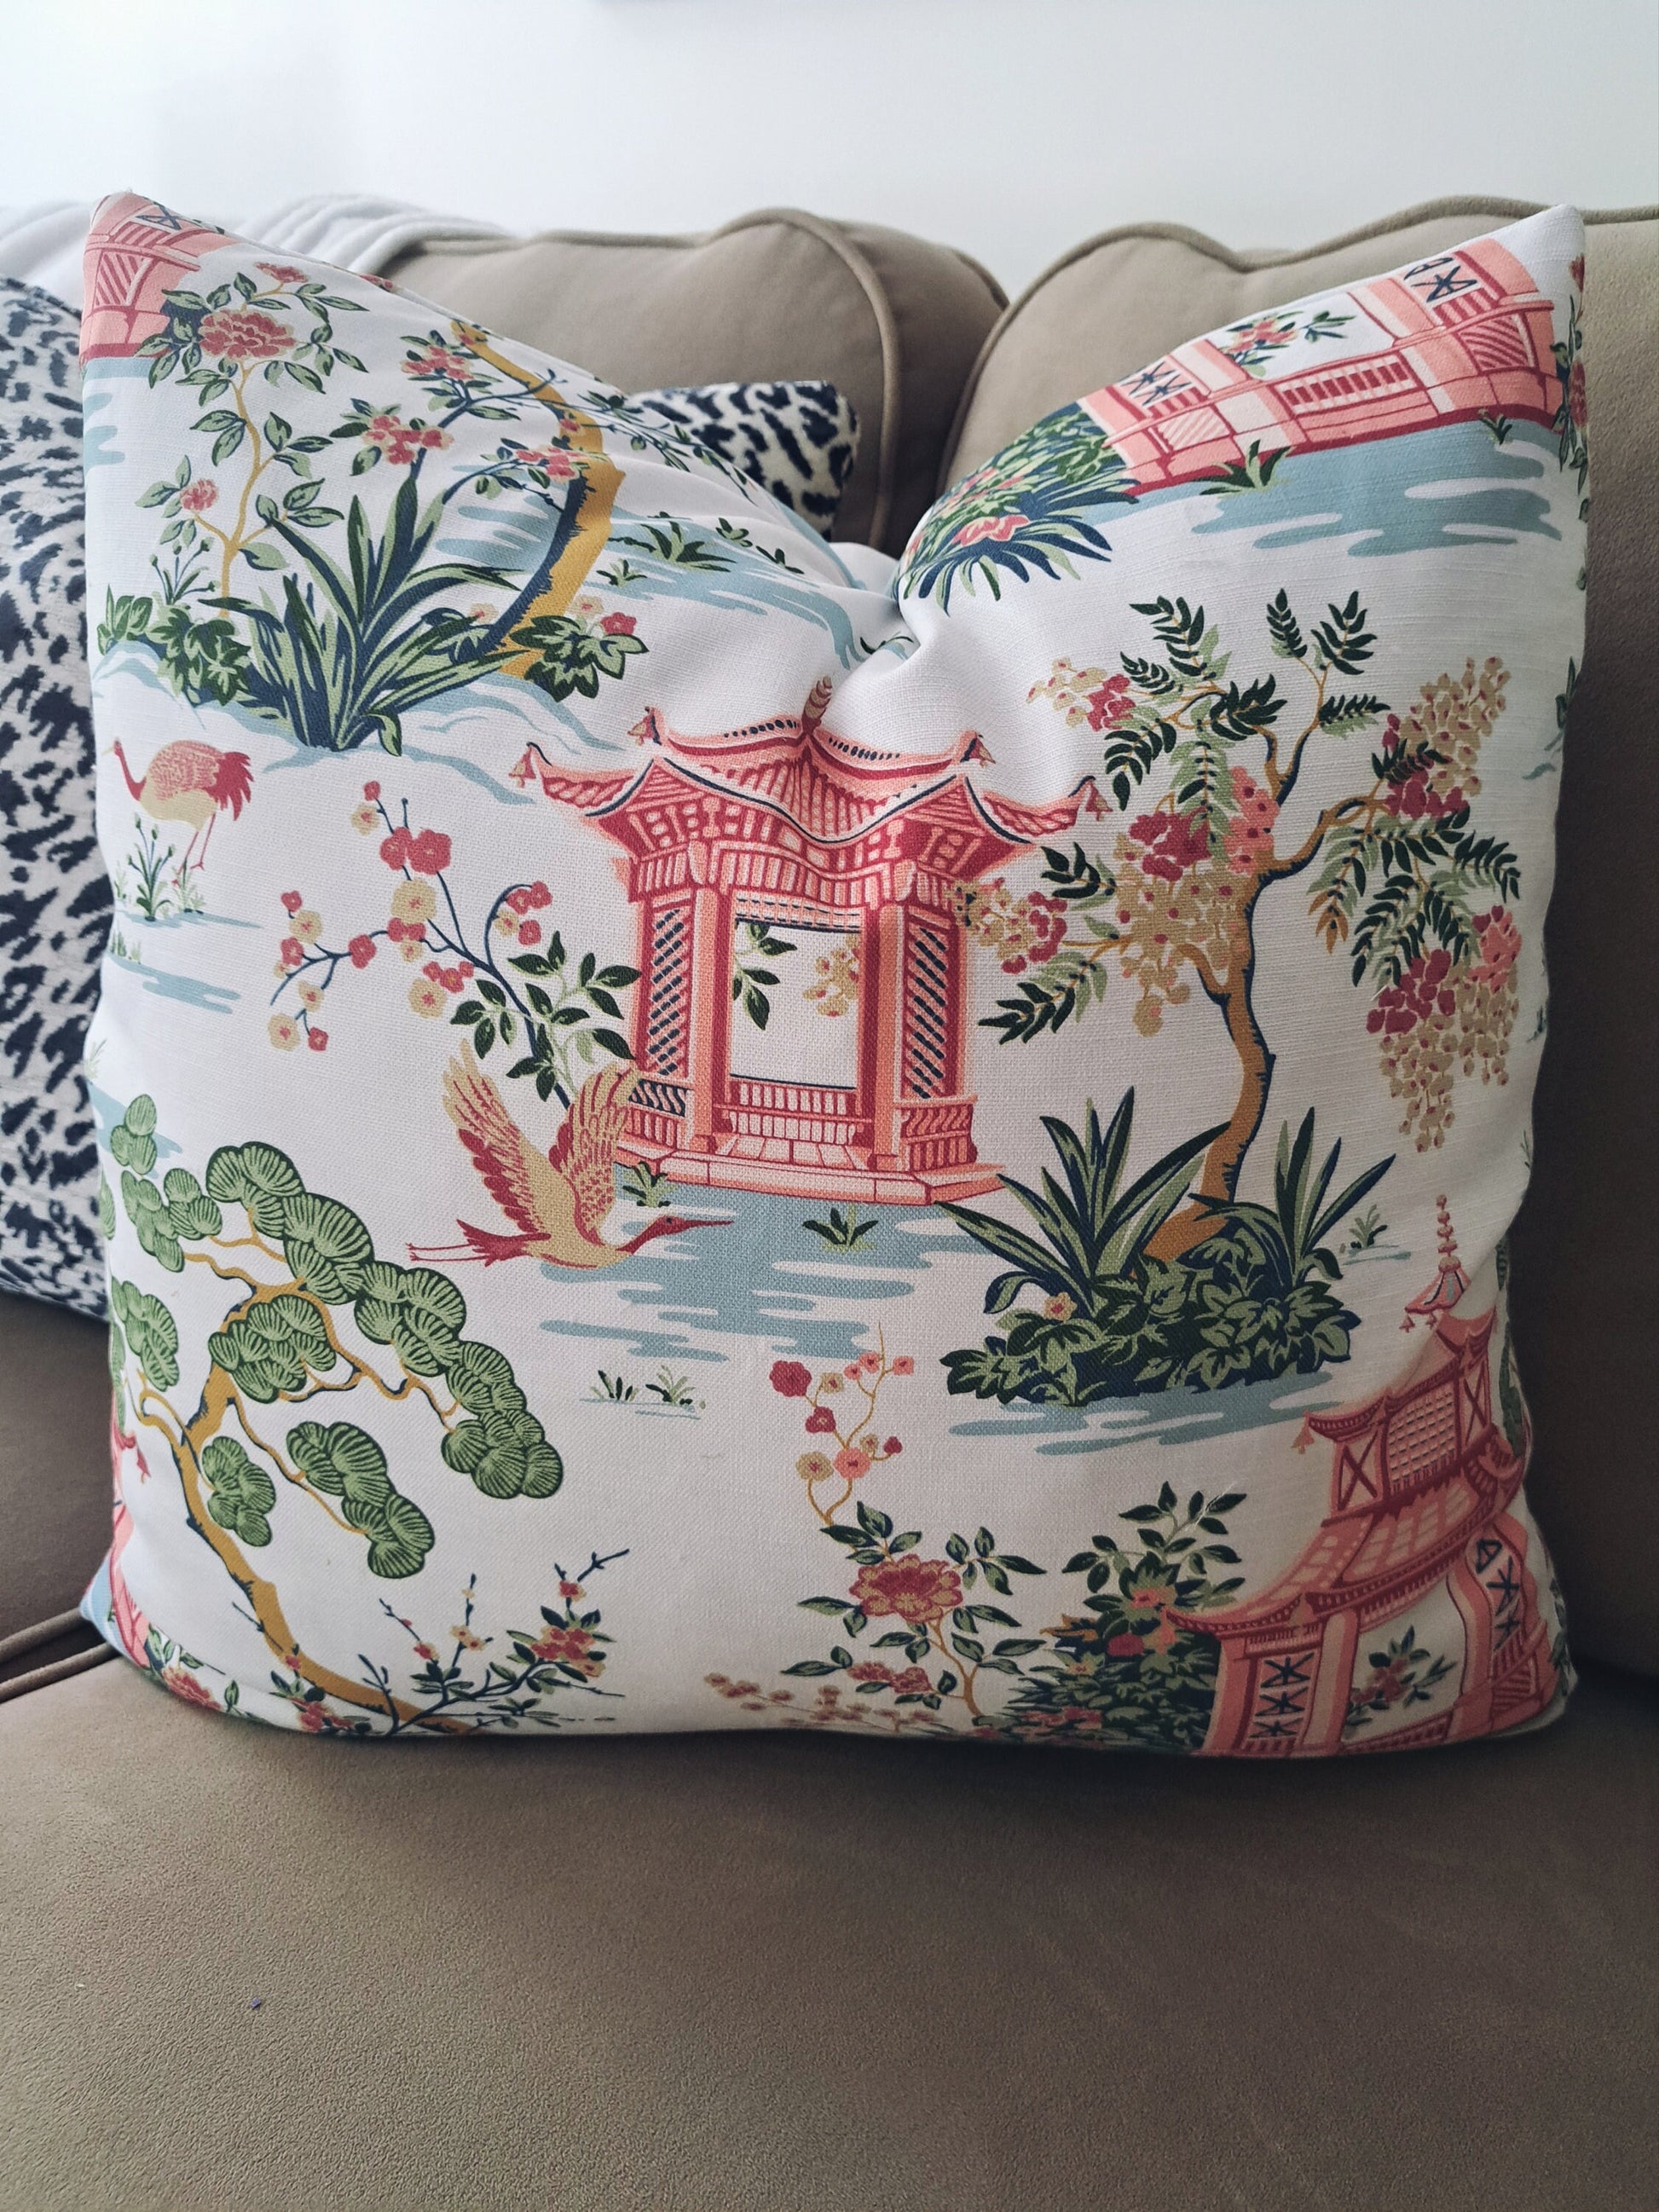 Blush Pink and Green Chinoiserie Scenery Pillow Cover